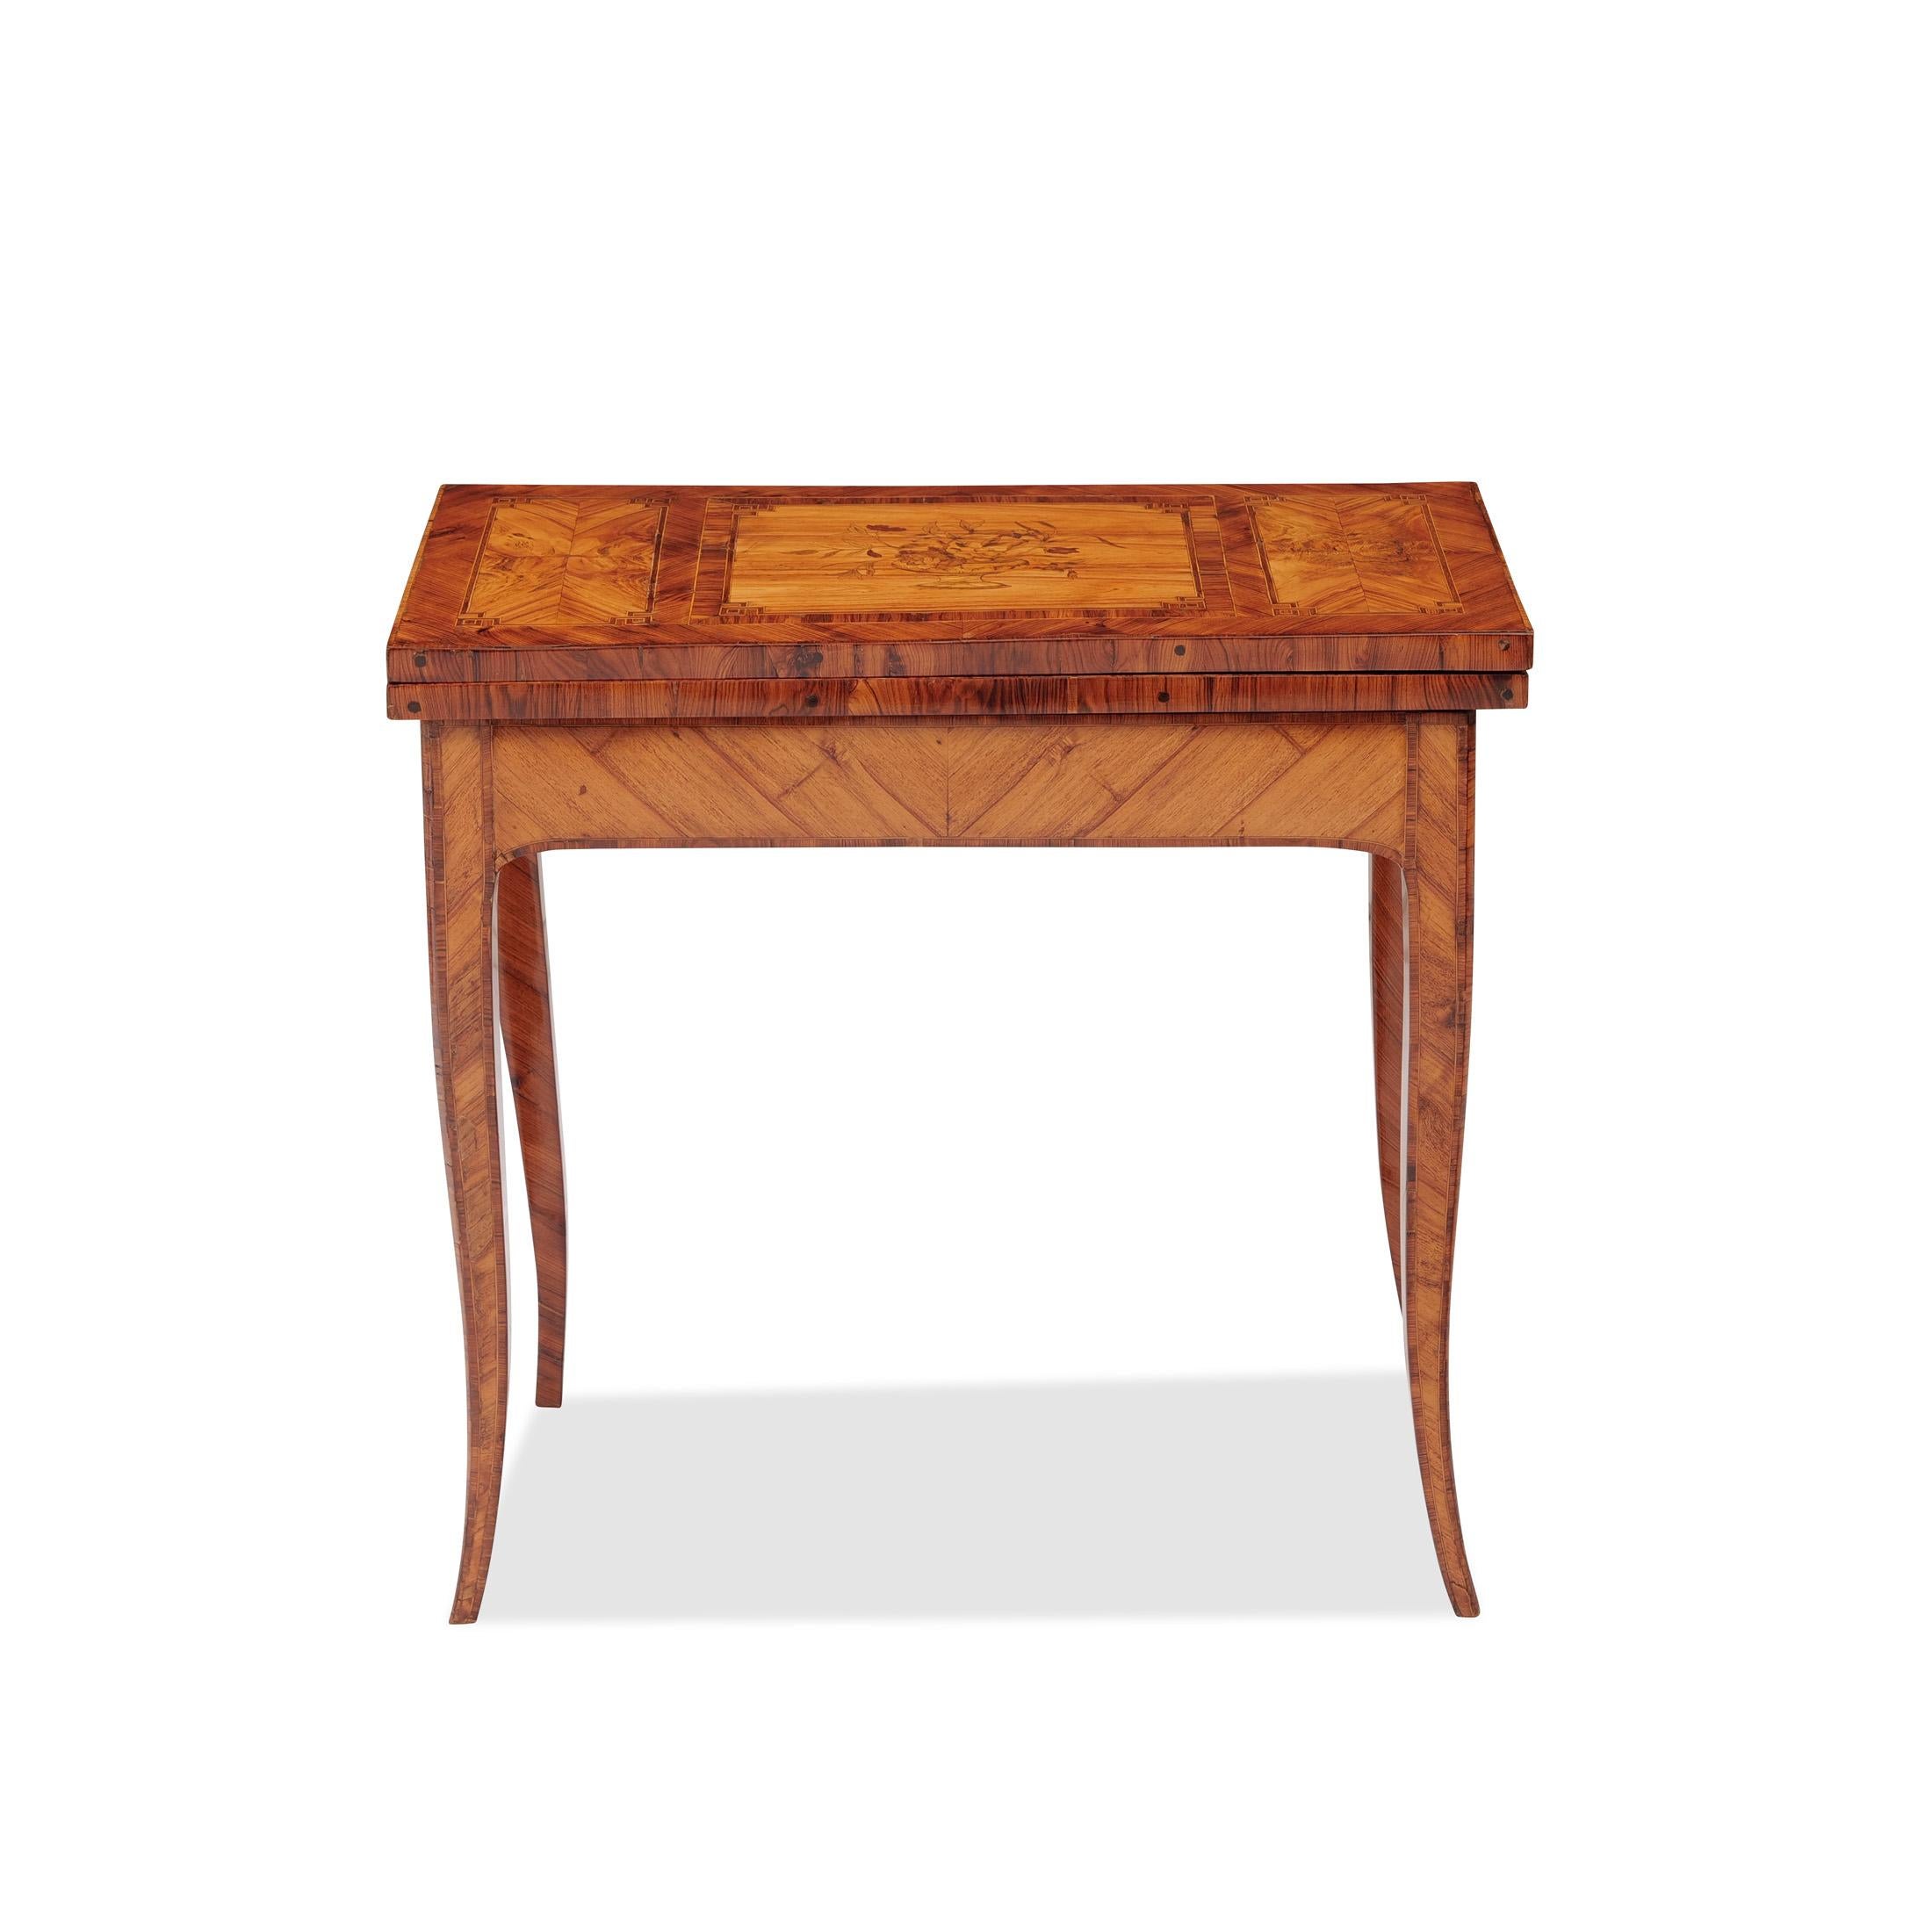 Louis Quinze console
France, Louis-Quinze circa 1760, rosewood and rosewood veneer and marquetry, top with lush inlays in floral motifs, fine ribbon inlays, slightly flared square legs, hinged, green felt interior. Shellac hand polish

Dimensions: